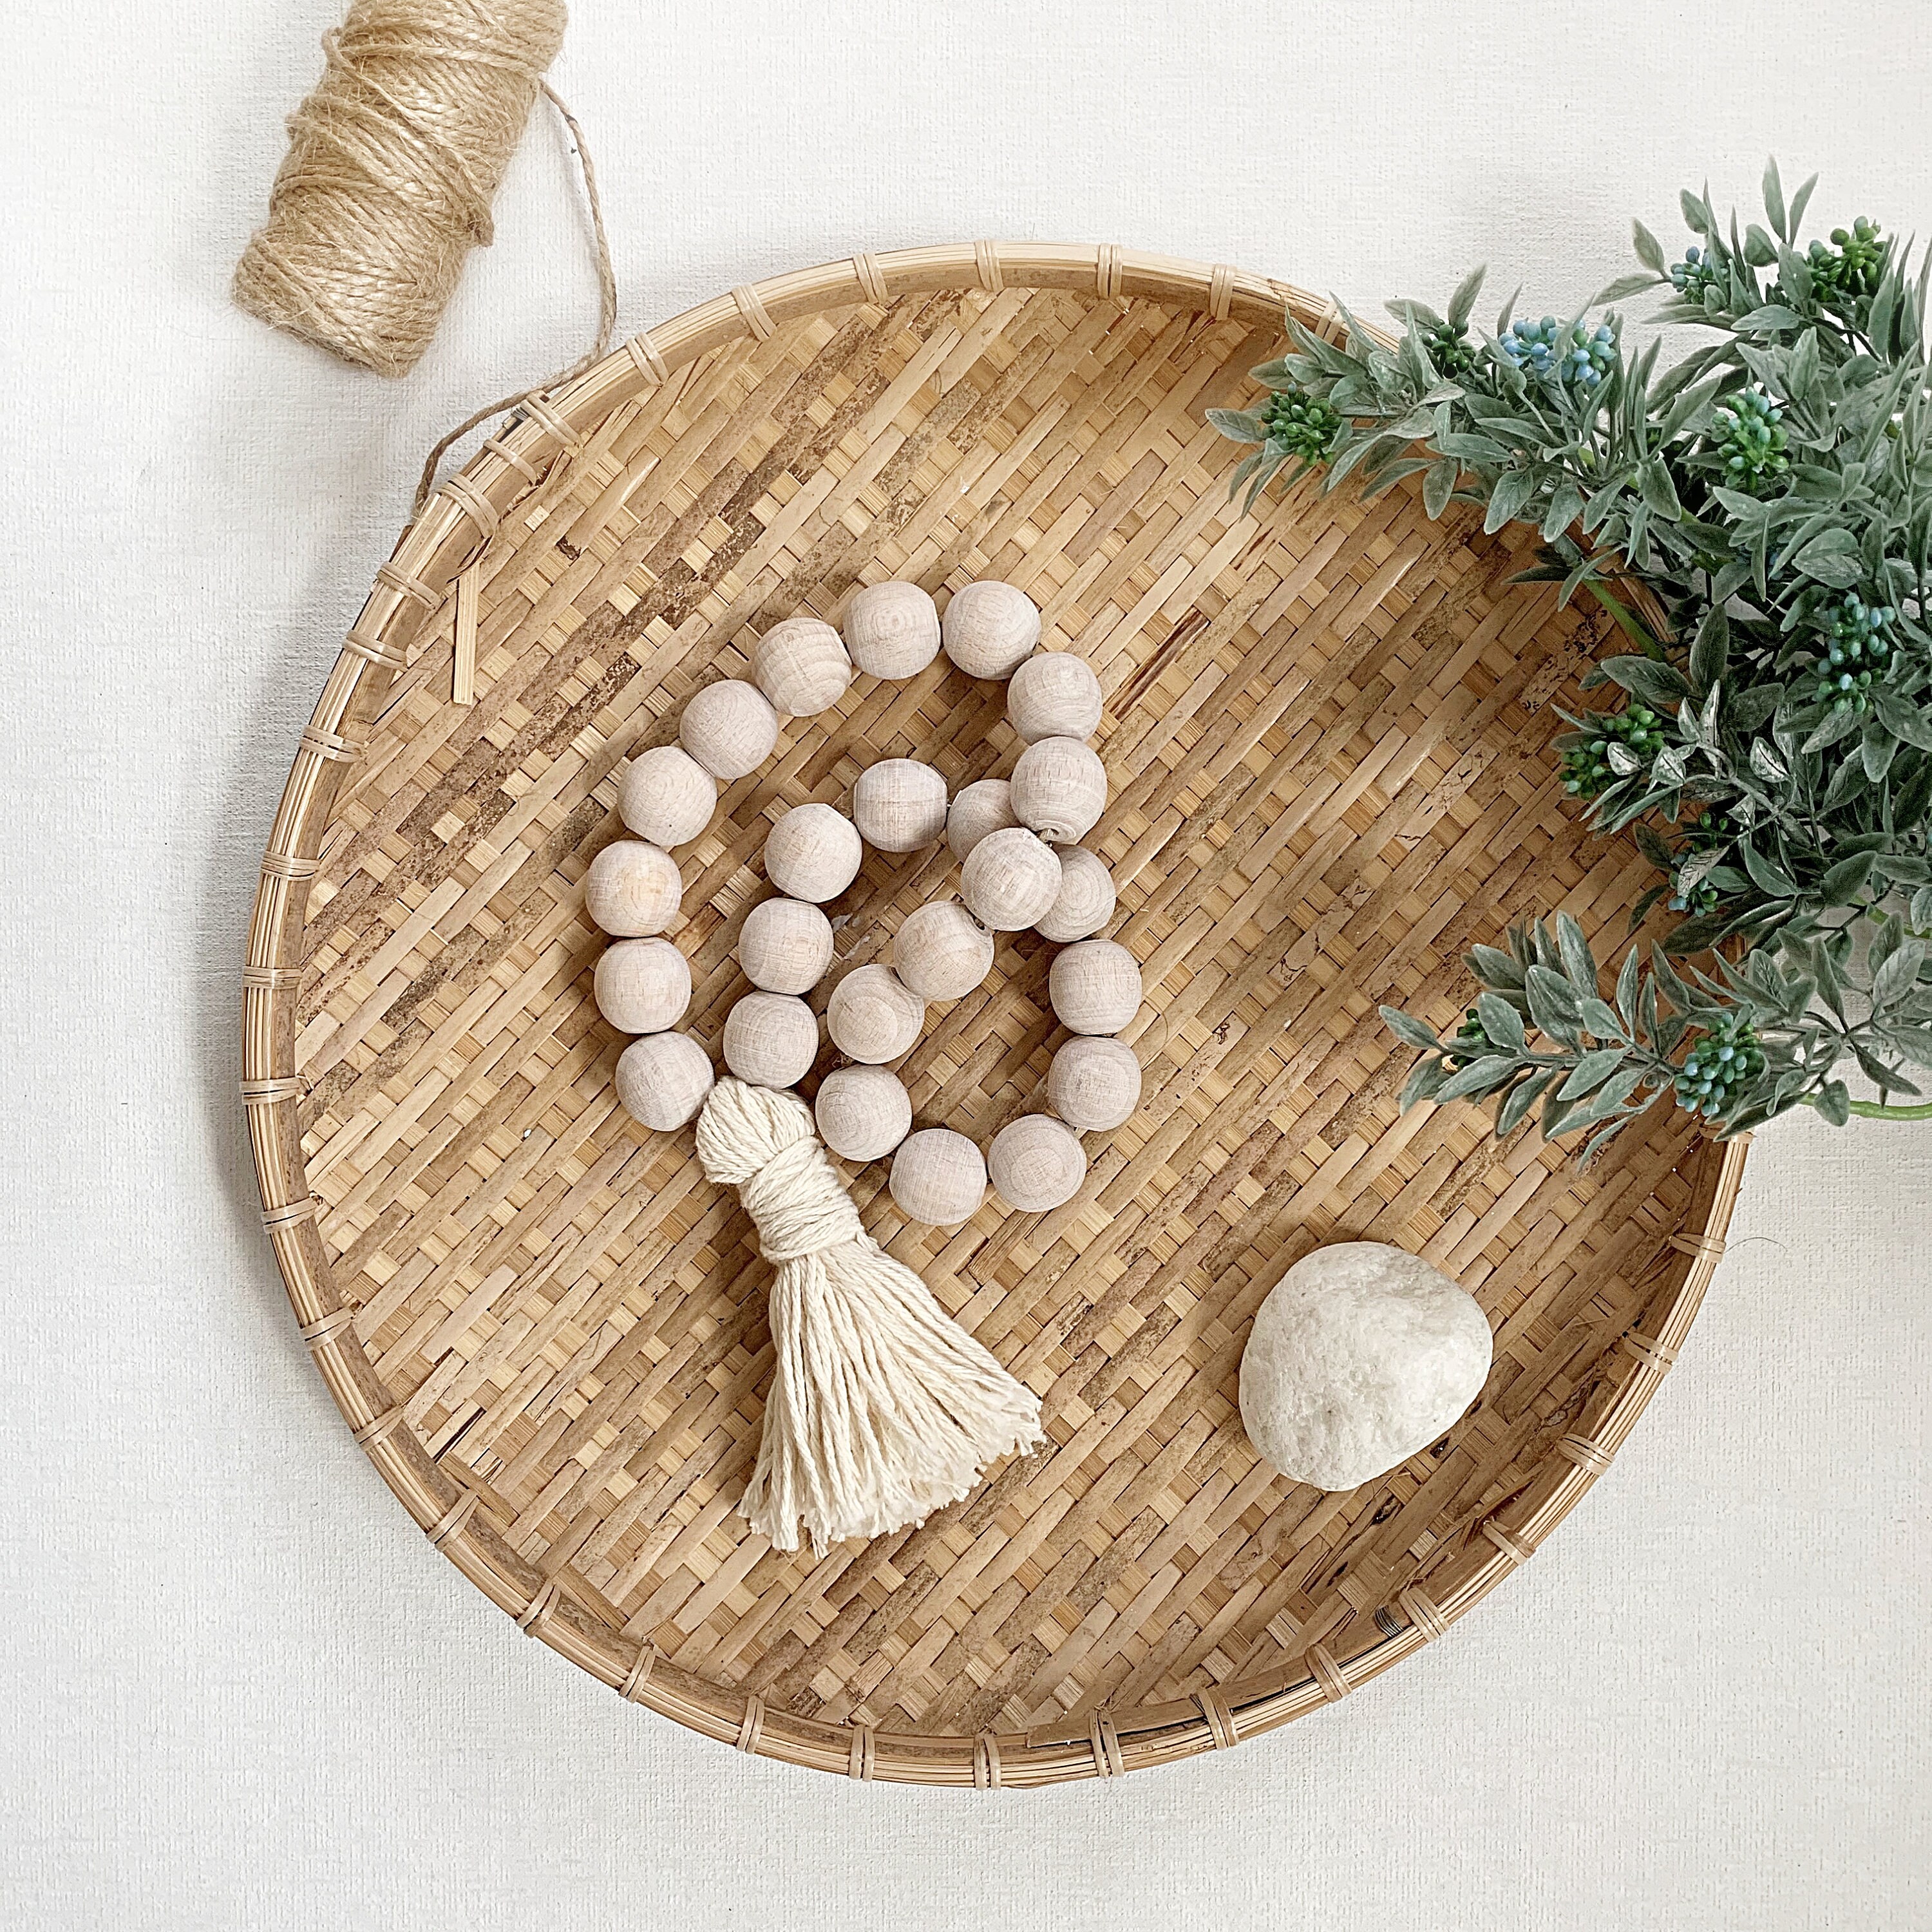 OMISHE Wood Bead Garland with Tassels, 59in Wooden Beads Garland,  Decorative Beads Garland Decor, Farmhouse Beads Garland for Wall Hanging  Home